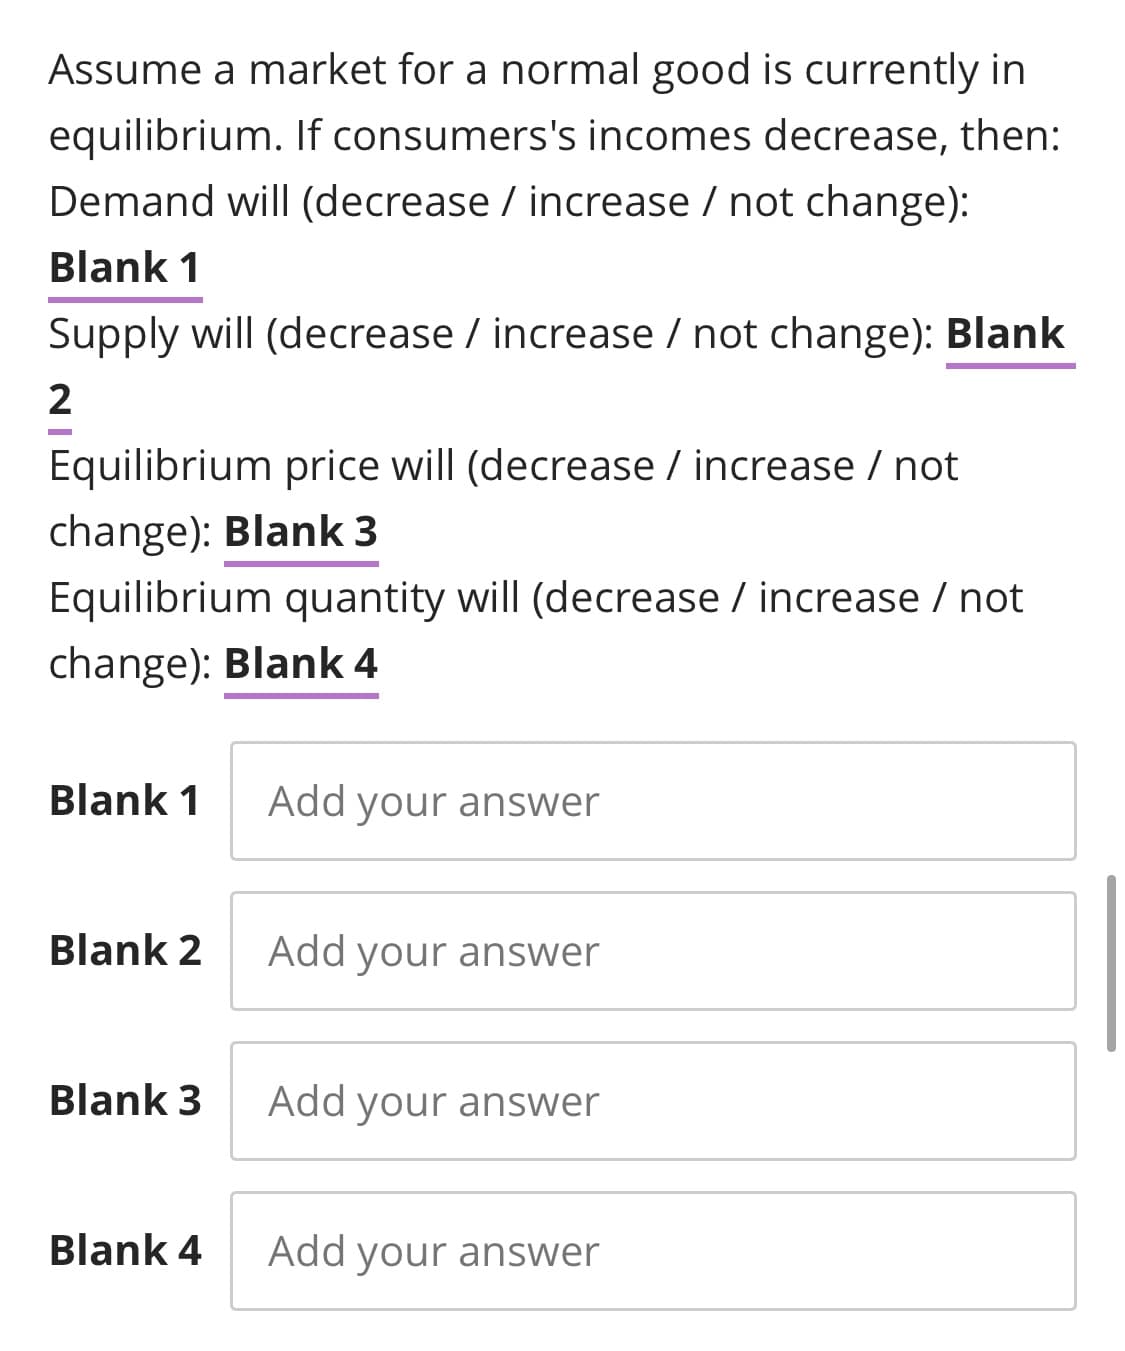 Assume a market for a normal good is currently in
equilibrium. If consumers's incomes decrease, then:
Demand will (decrease / increase / not change):
Blank 1
Supply will (decrease / increase / not change): Blank
Equilibrium price will (decrease / increase / not
change): Blank 3
Equilibrium quantity will (decrease / increase / not
change): Blank 4
Blank 1
Add your answer
Blank 2
Add your answer
Blank 3
Add your answer
Blank 4
Add your answer
